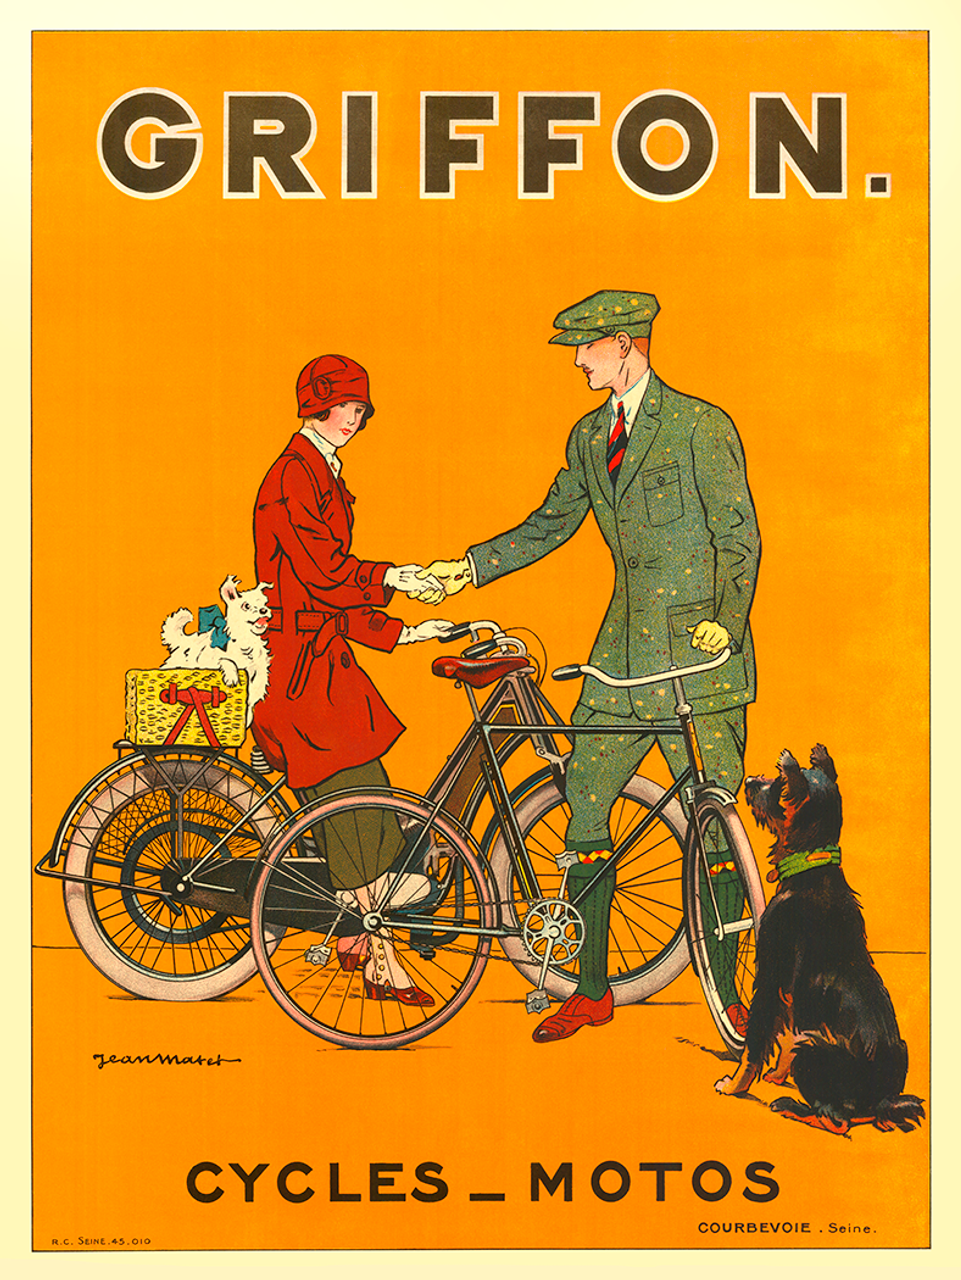 Griffon Cycles-Motos Bicycle Poster by Jean Matet